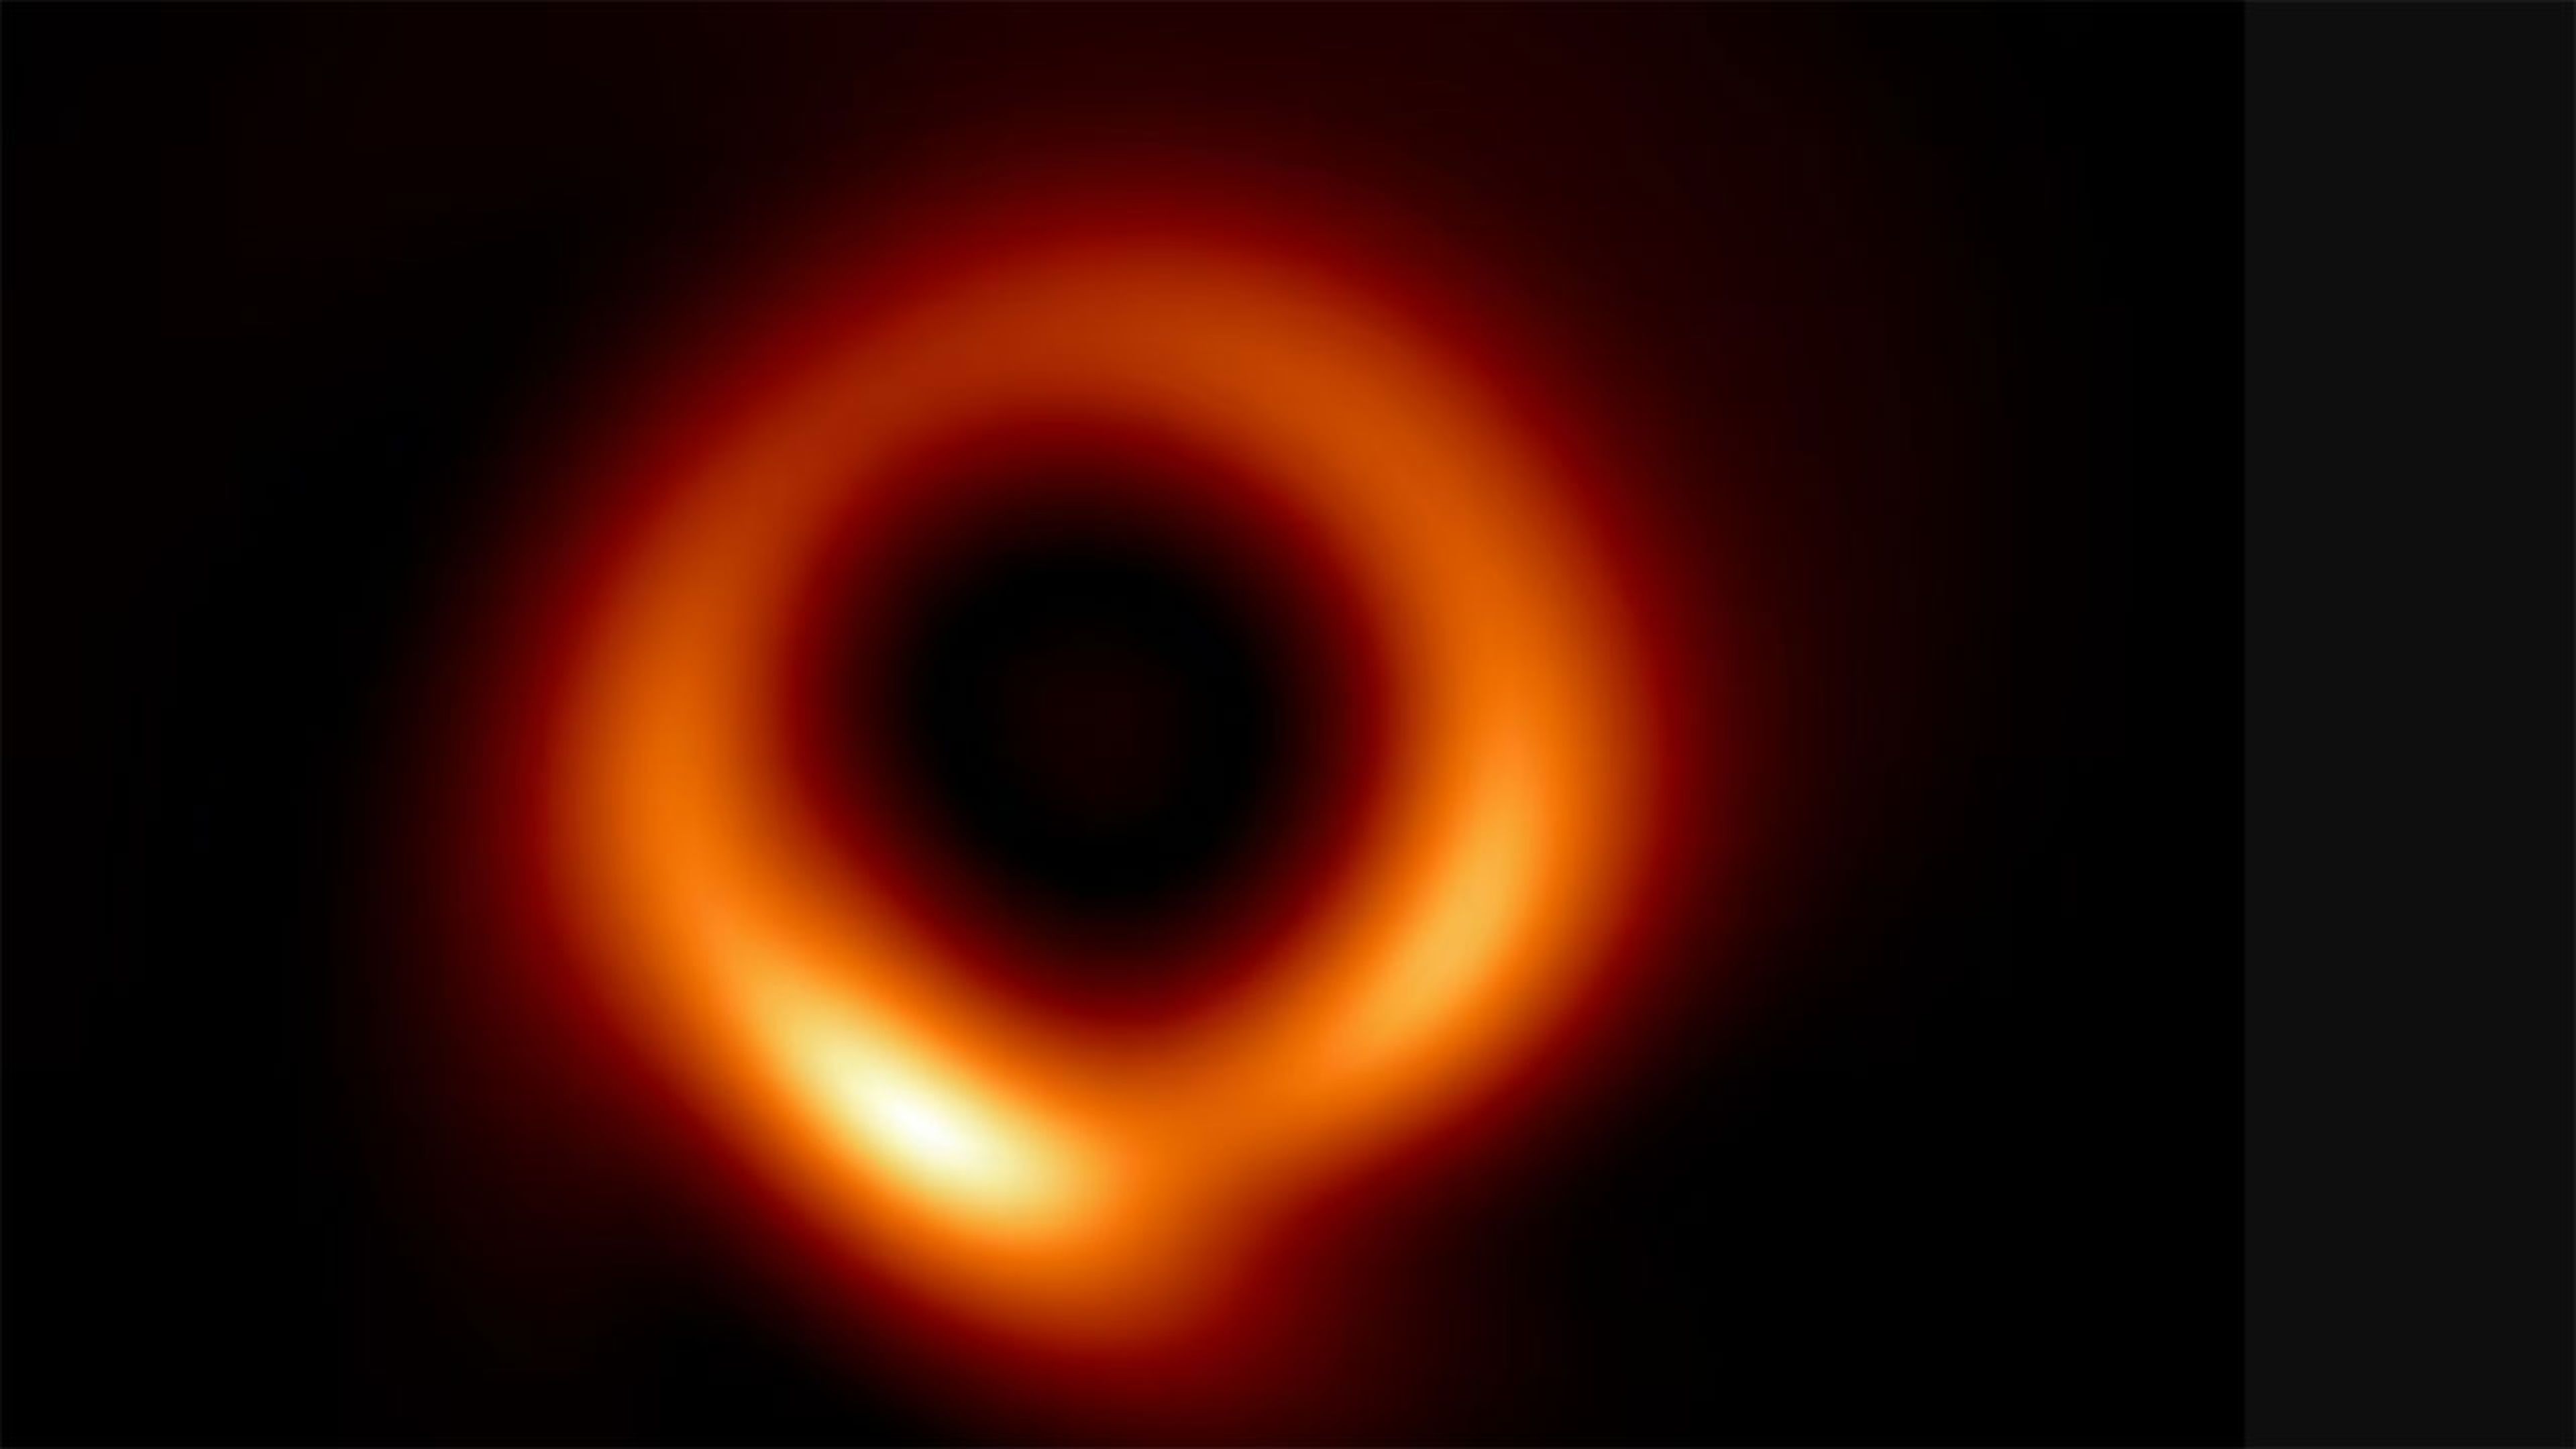 First full-resolution photograph of a supermassive black hole published